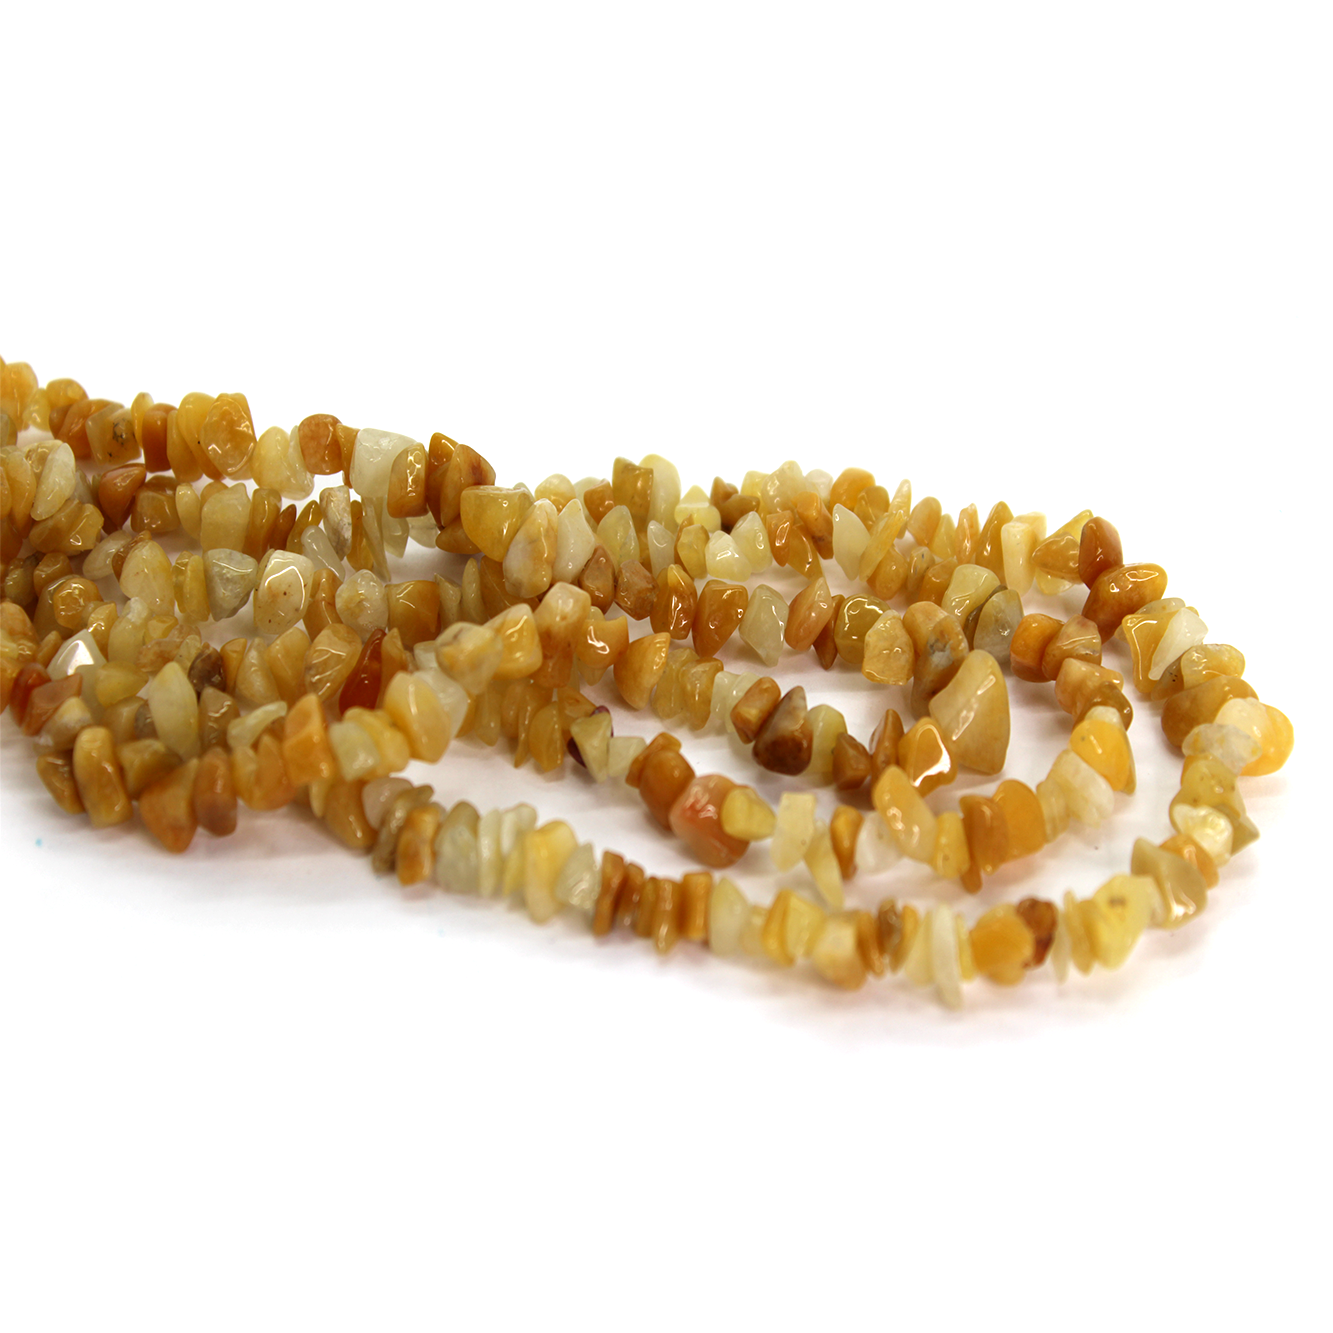 Chipped Jade, Semi-Precious Stone, Approx. 300 pcs, Available in Yellow or Yellow & Orange Mix Jade